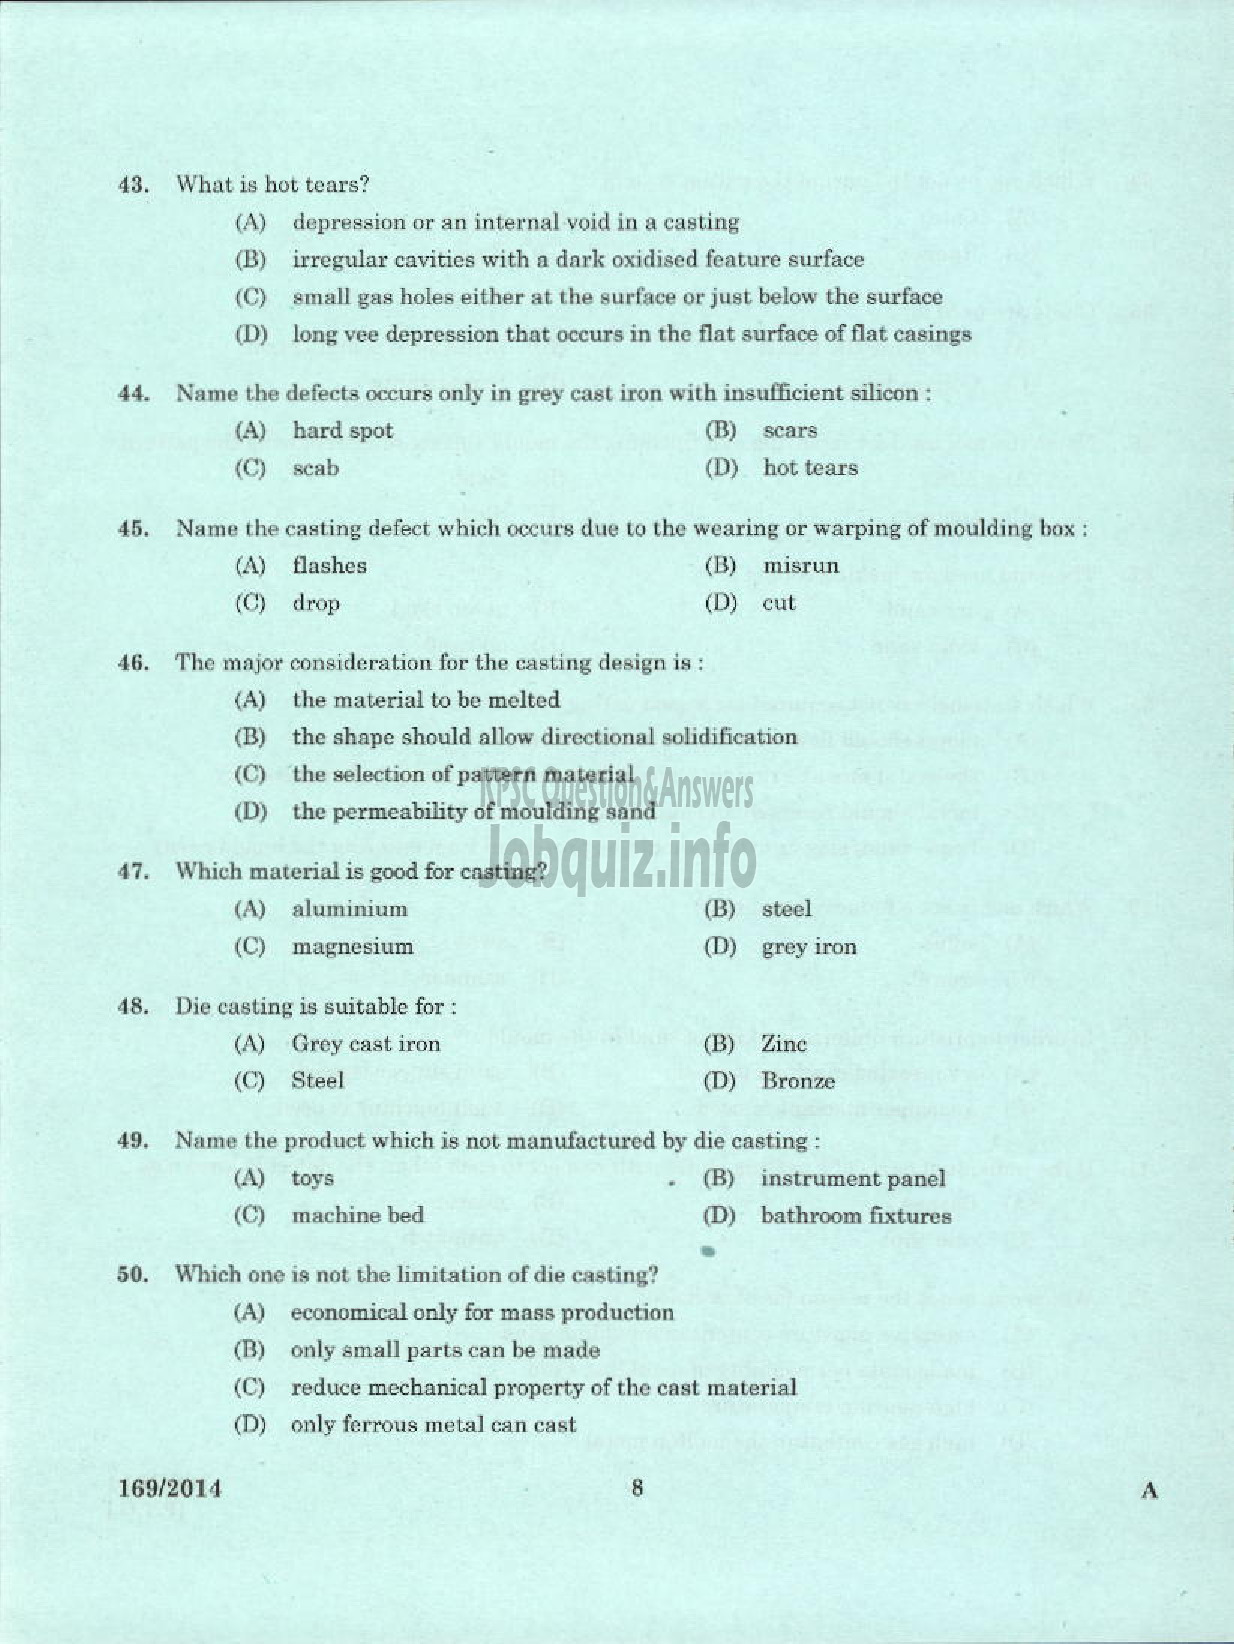 Kerala PSC Question Paper - TRADESMAN MOULDING AND FOUNDRY TECHNICAL EDUCATION TVPM PTA KTM AND TSR-6